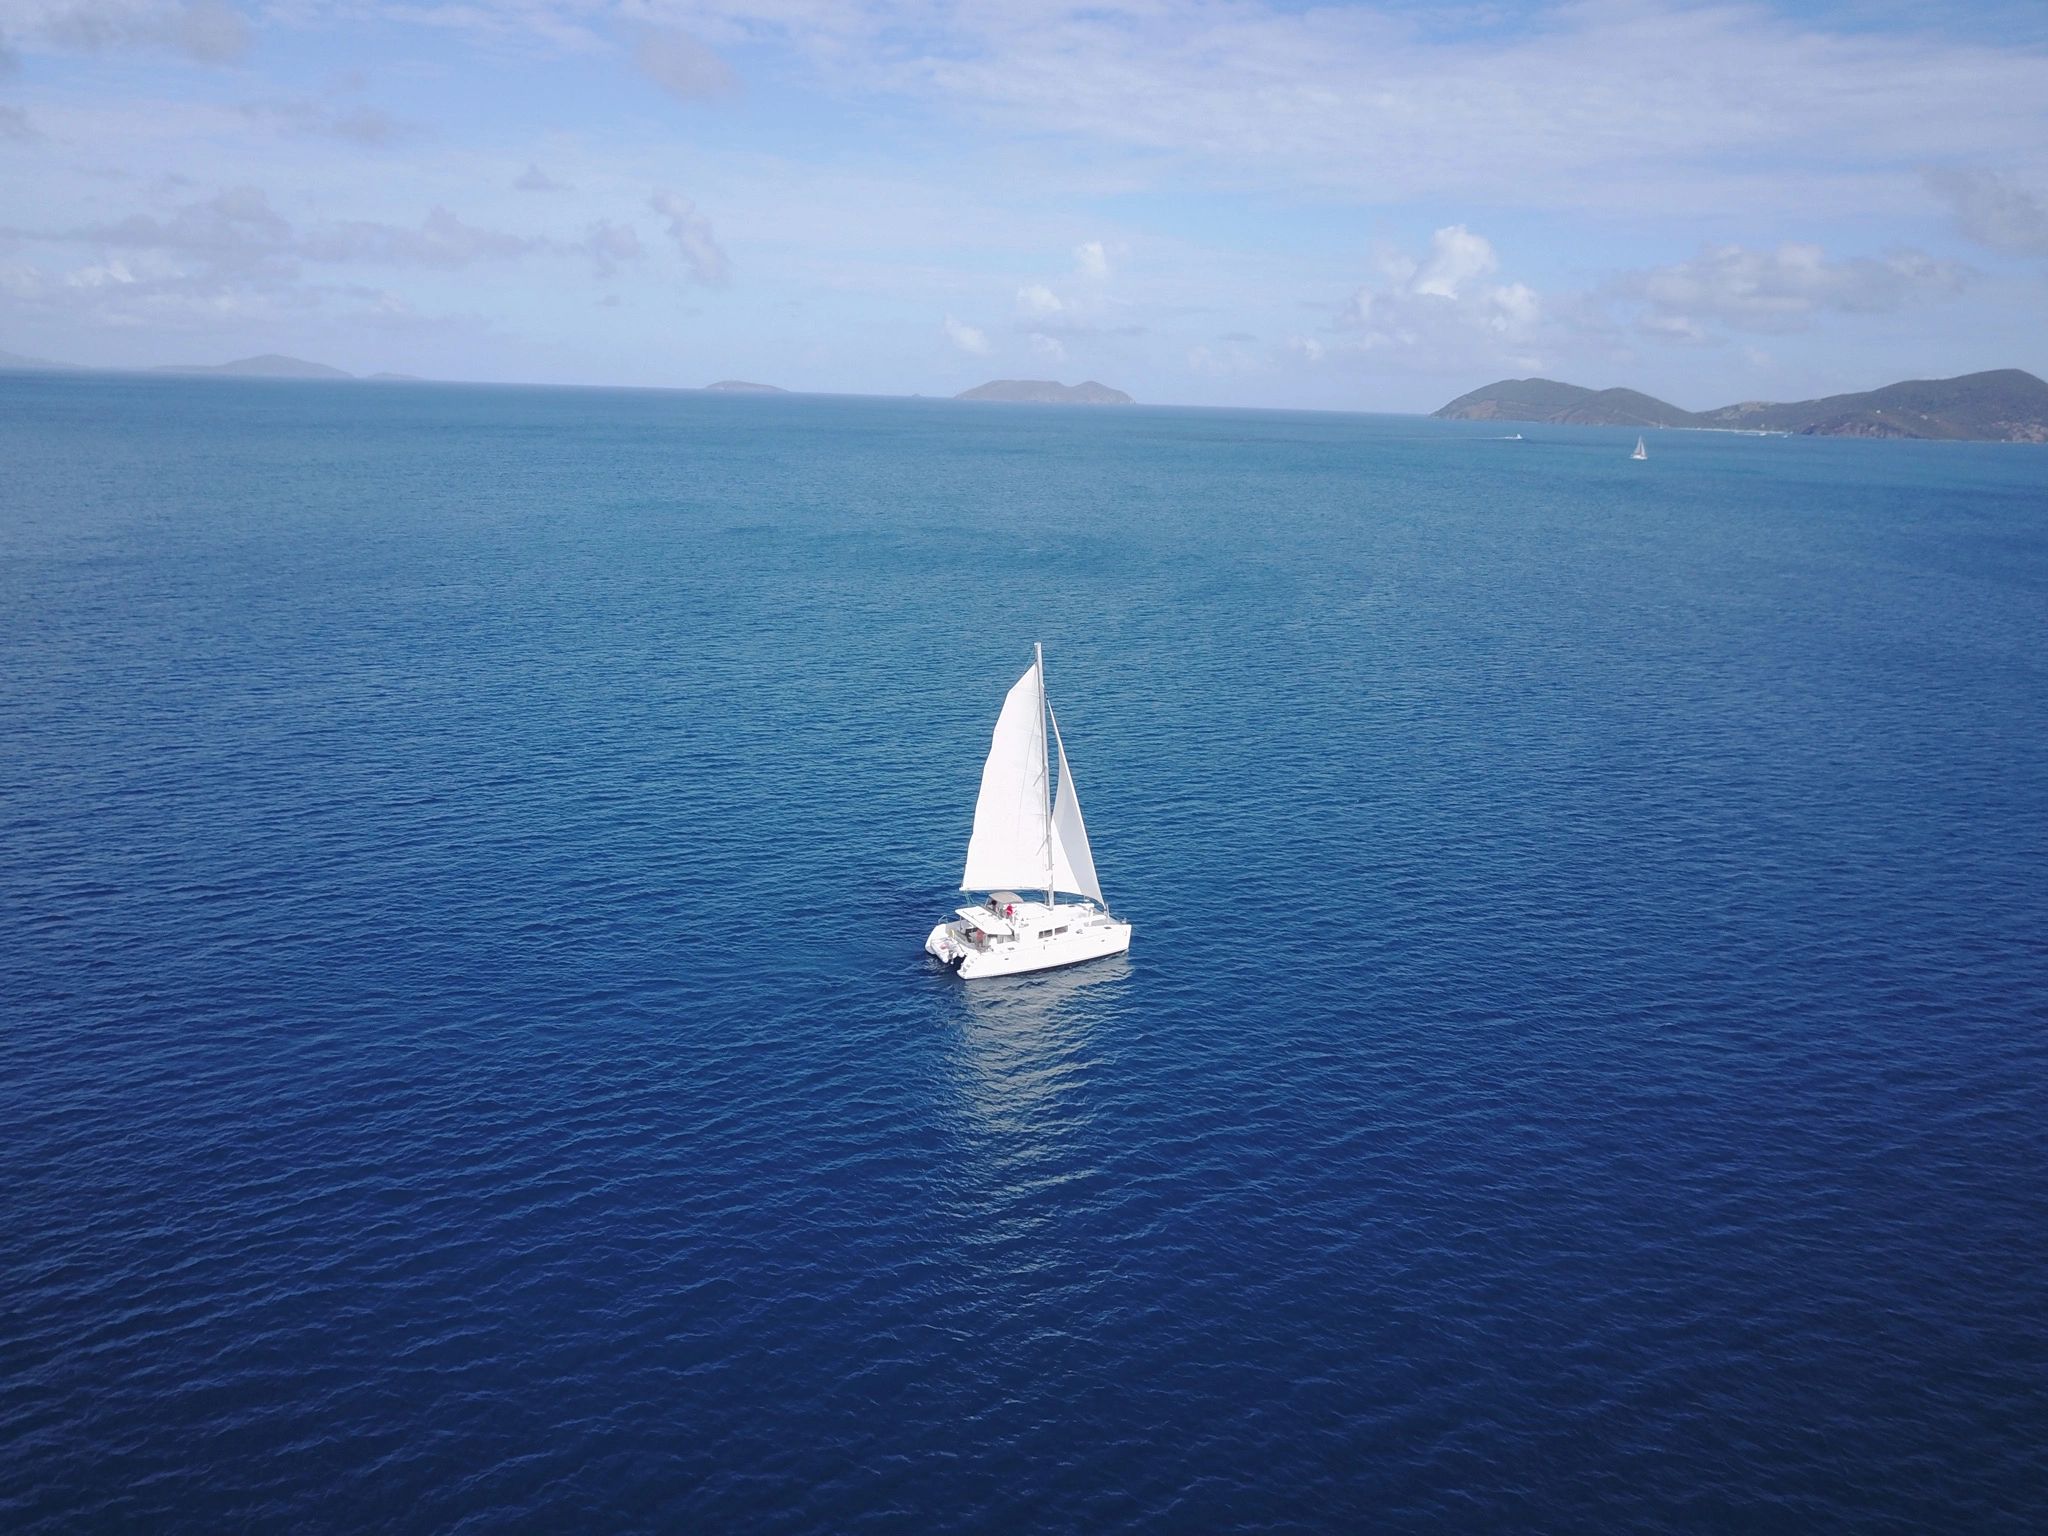 Photographer Dave Brown and the famous 'Brothers Sherrard' crew sailing Reposado, Virgin Islands.